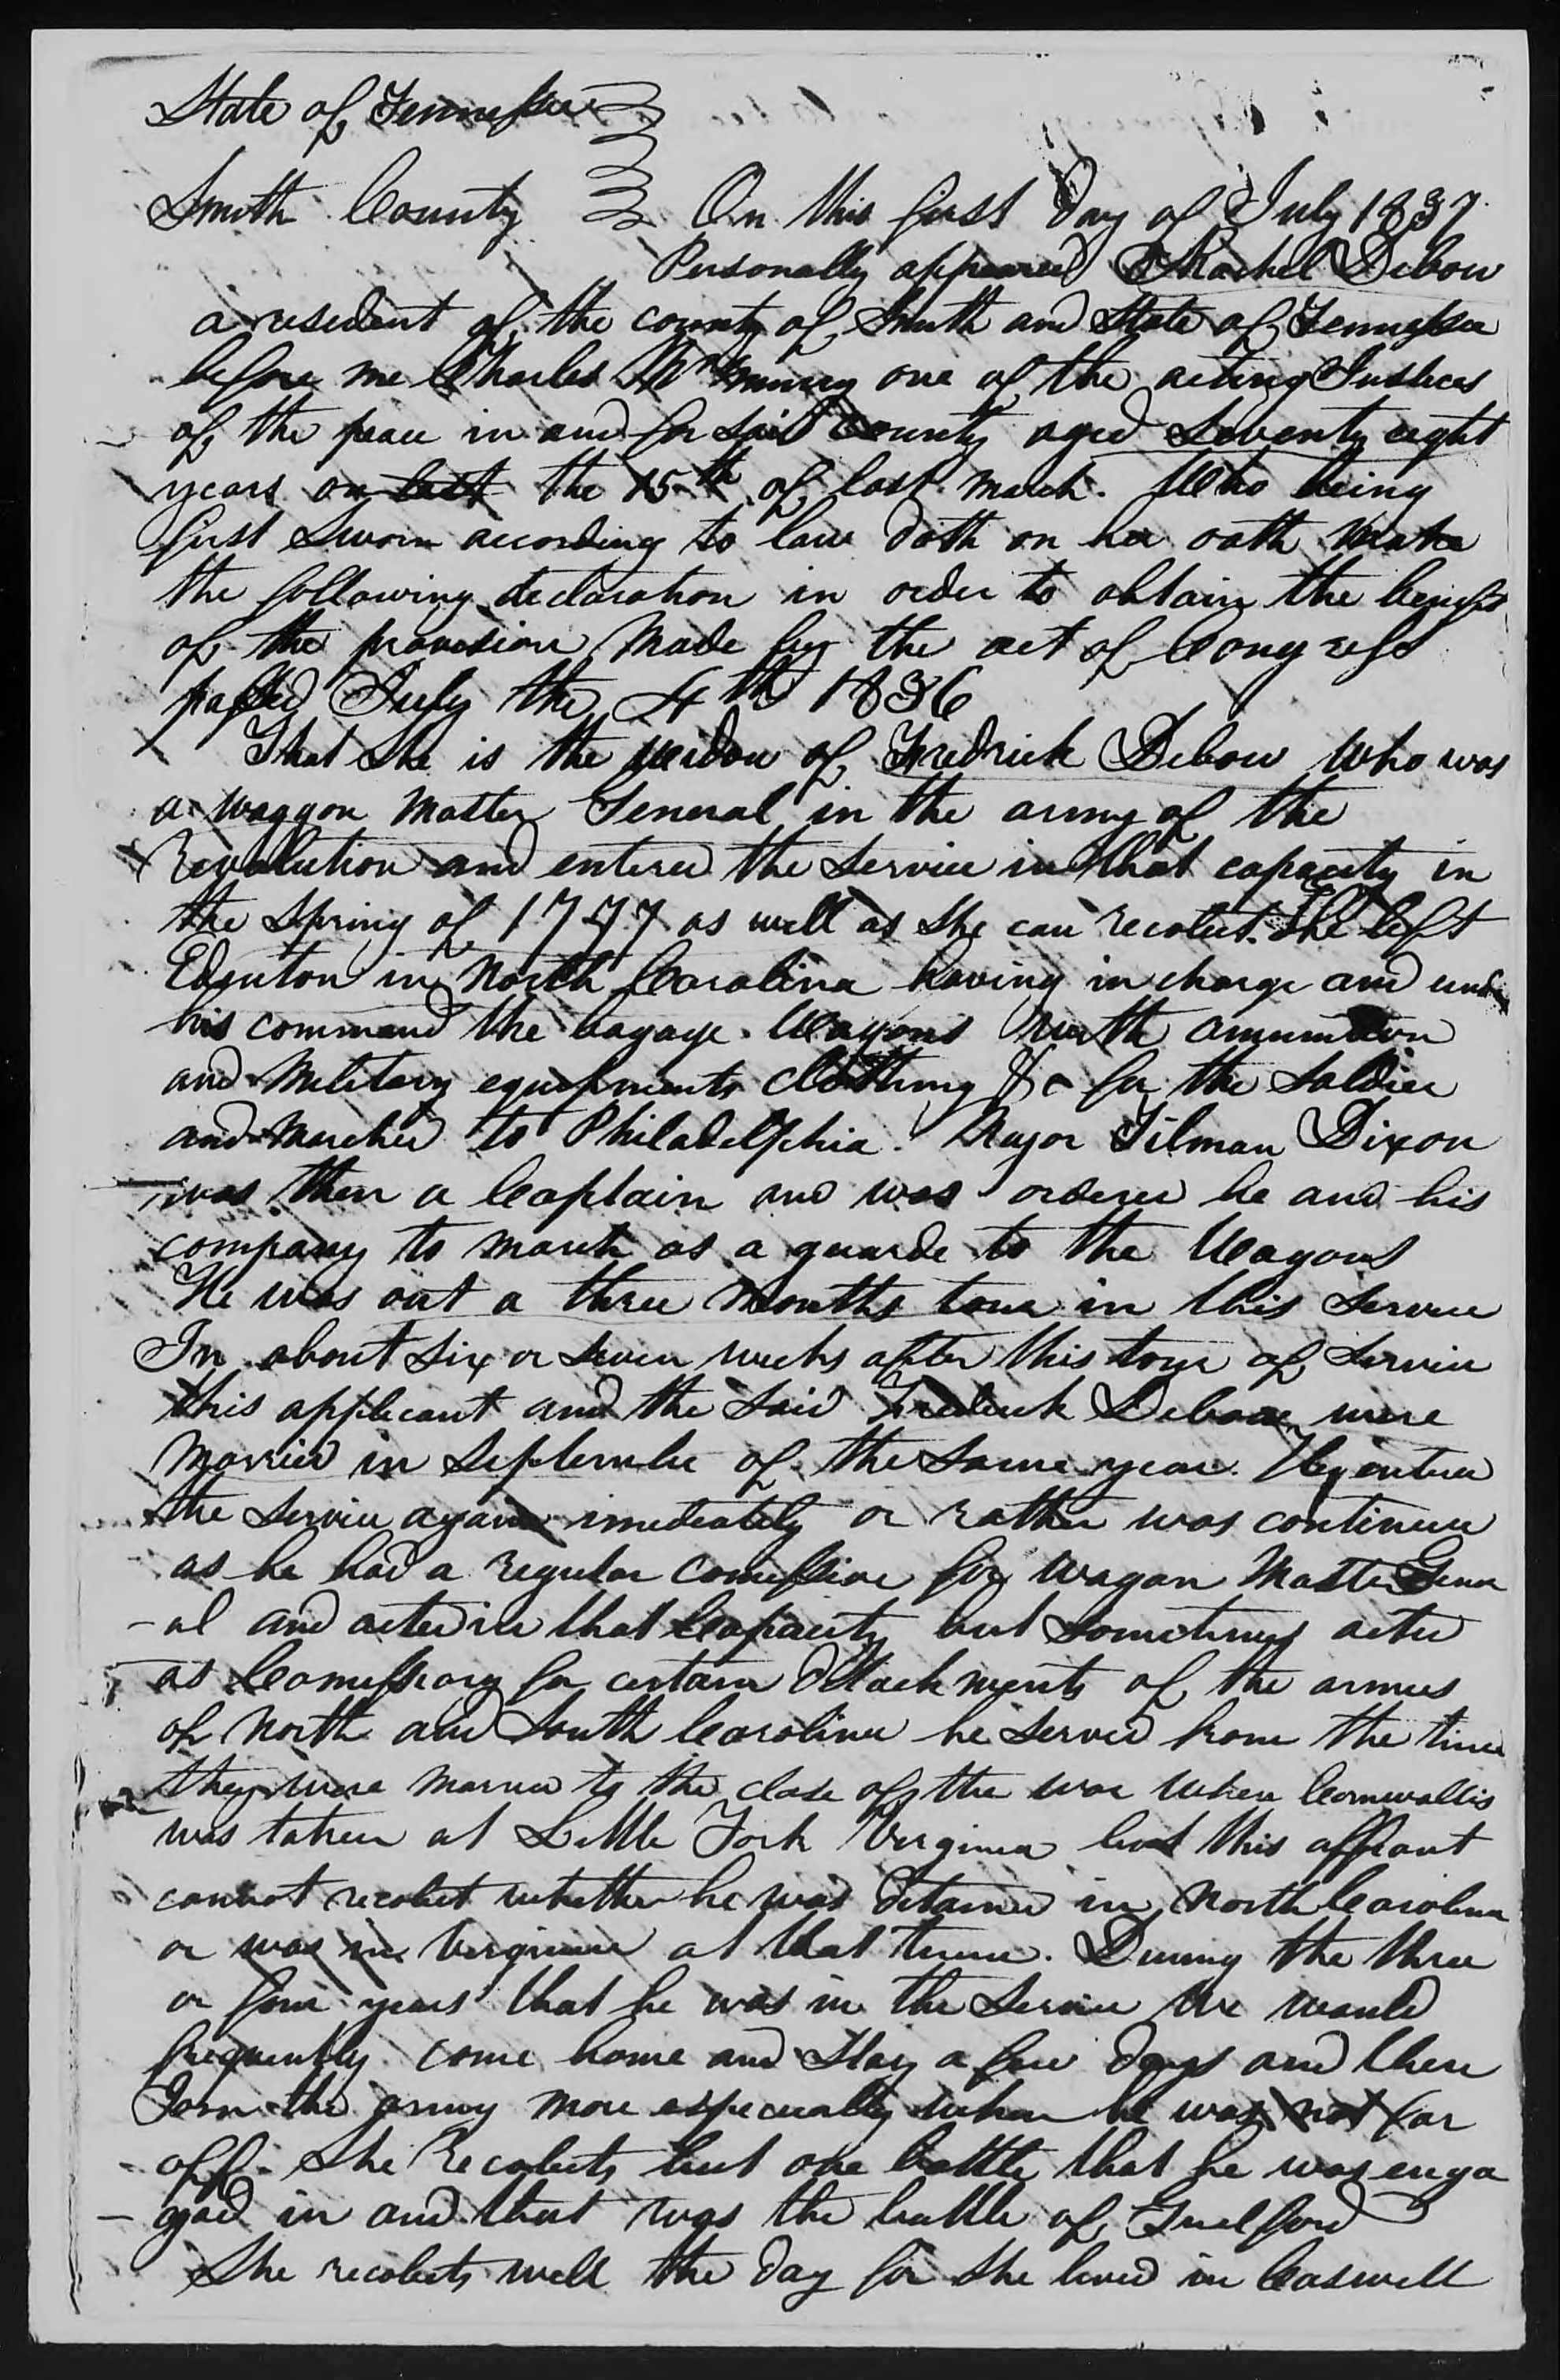 Application for a Widow's Pension from Rachel Debow, 1 July 1837, page 1